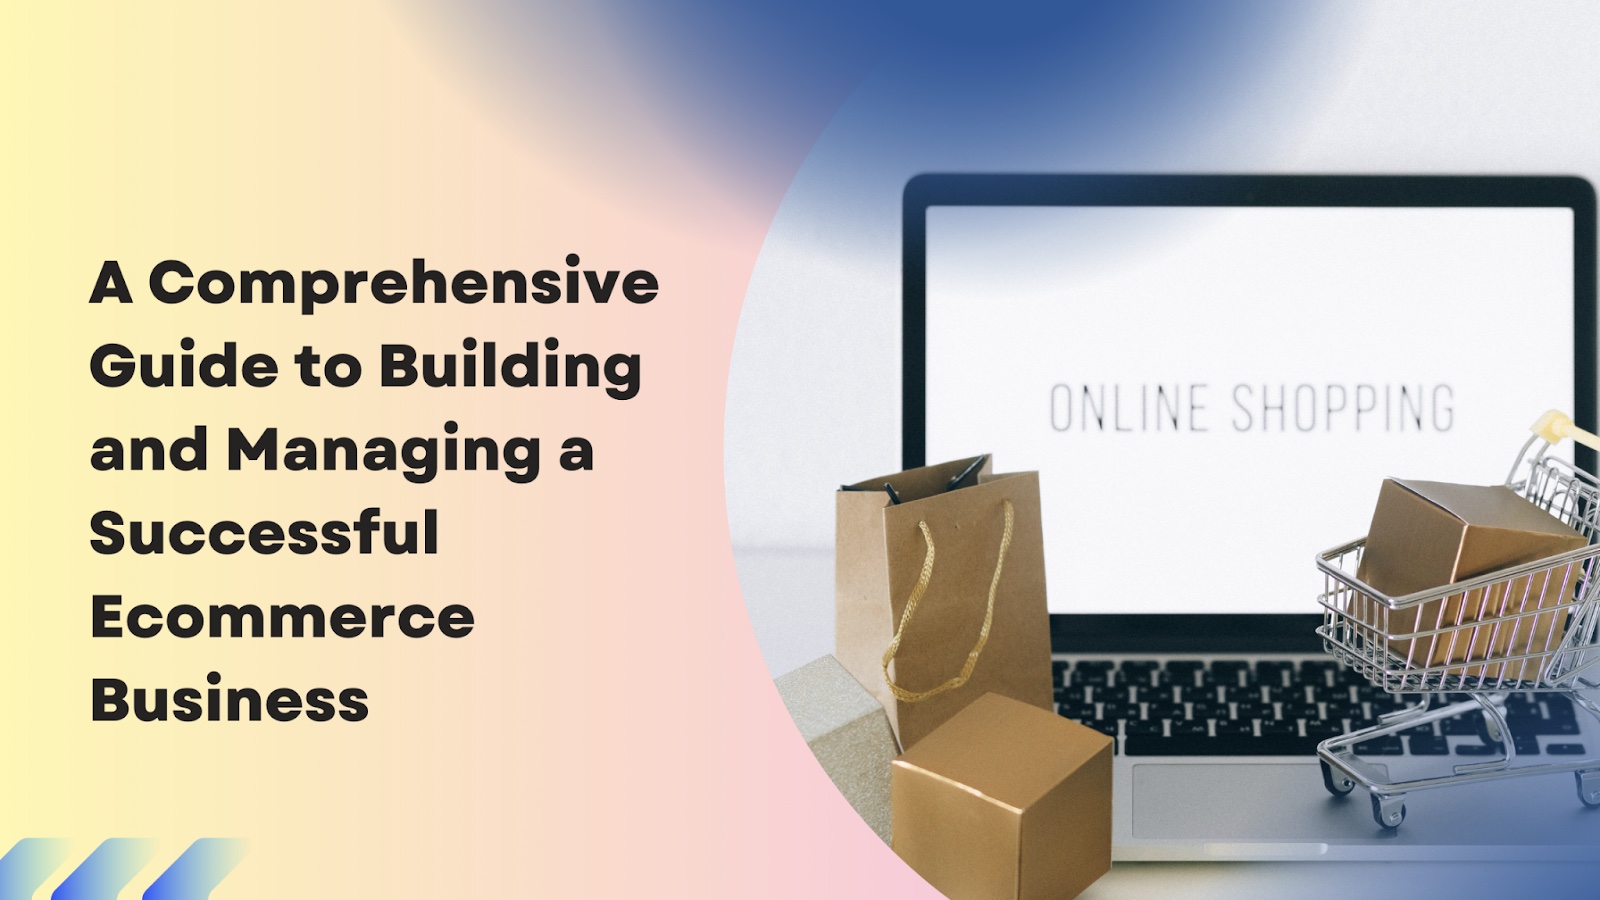 How To Start An Online Ecommerce Business